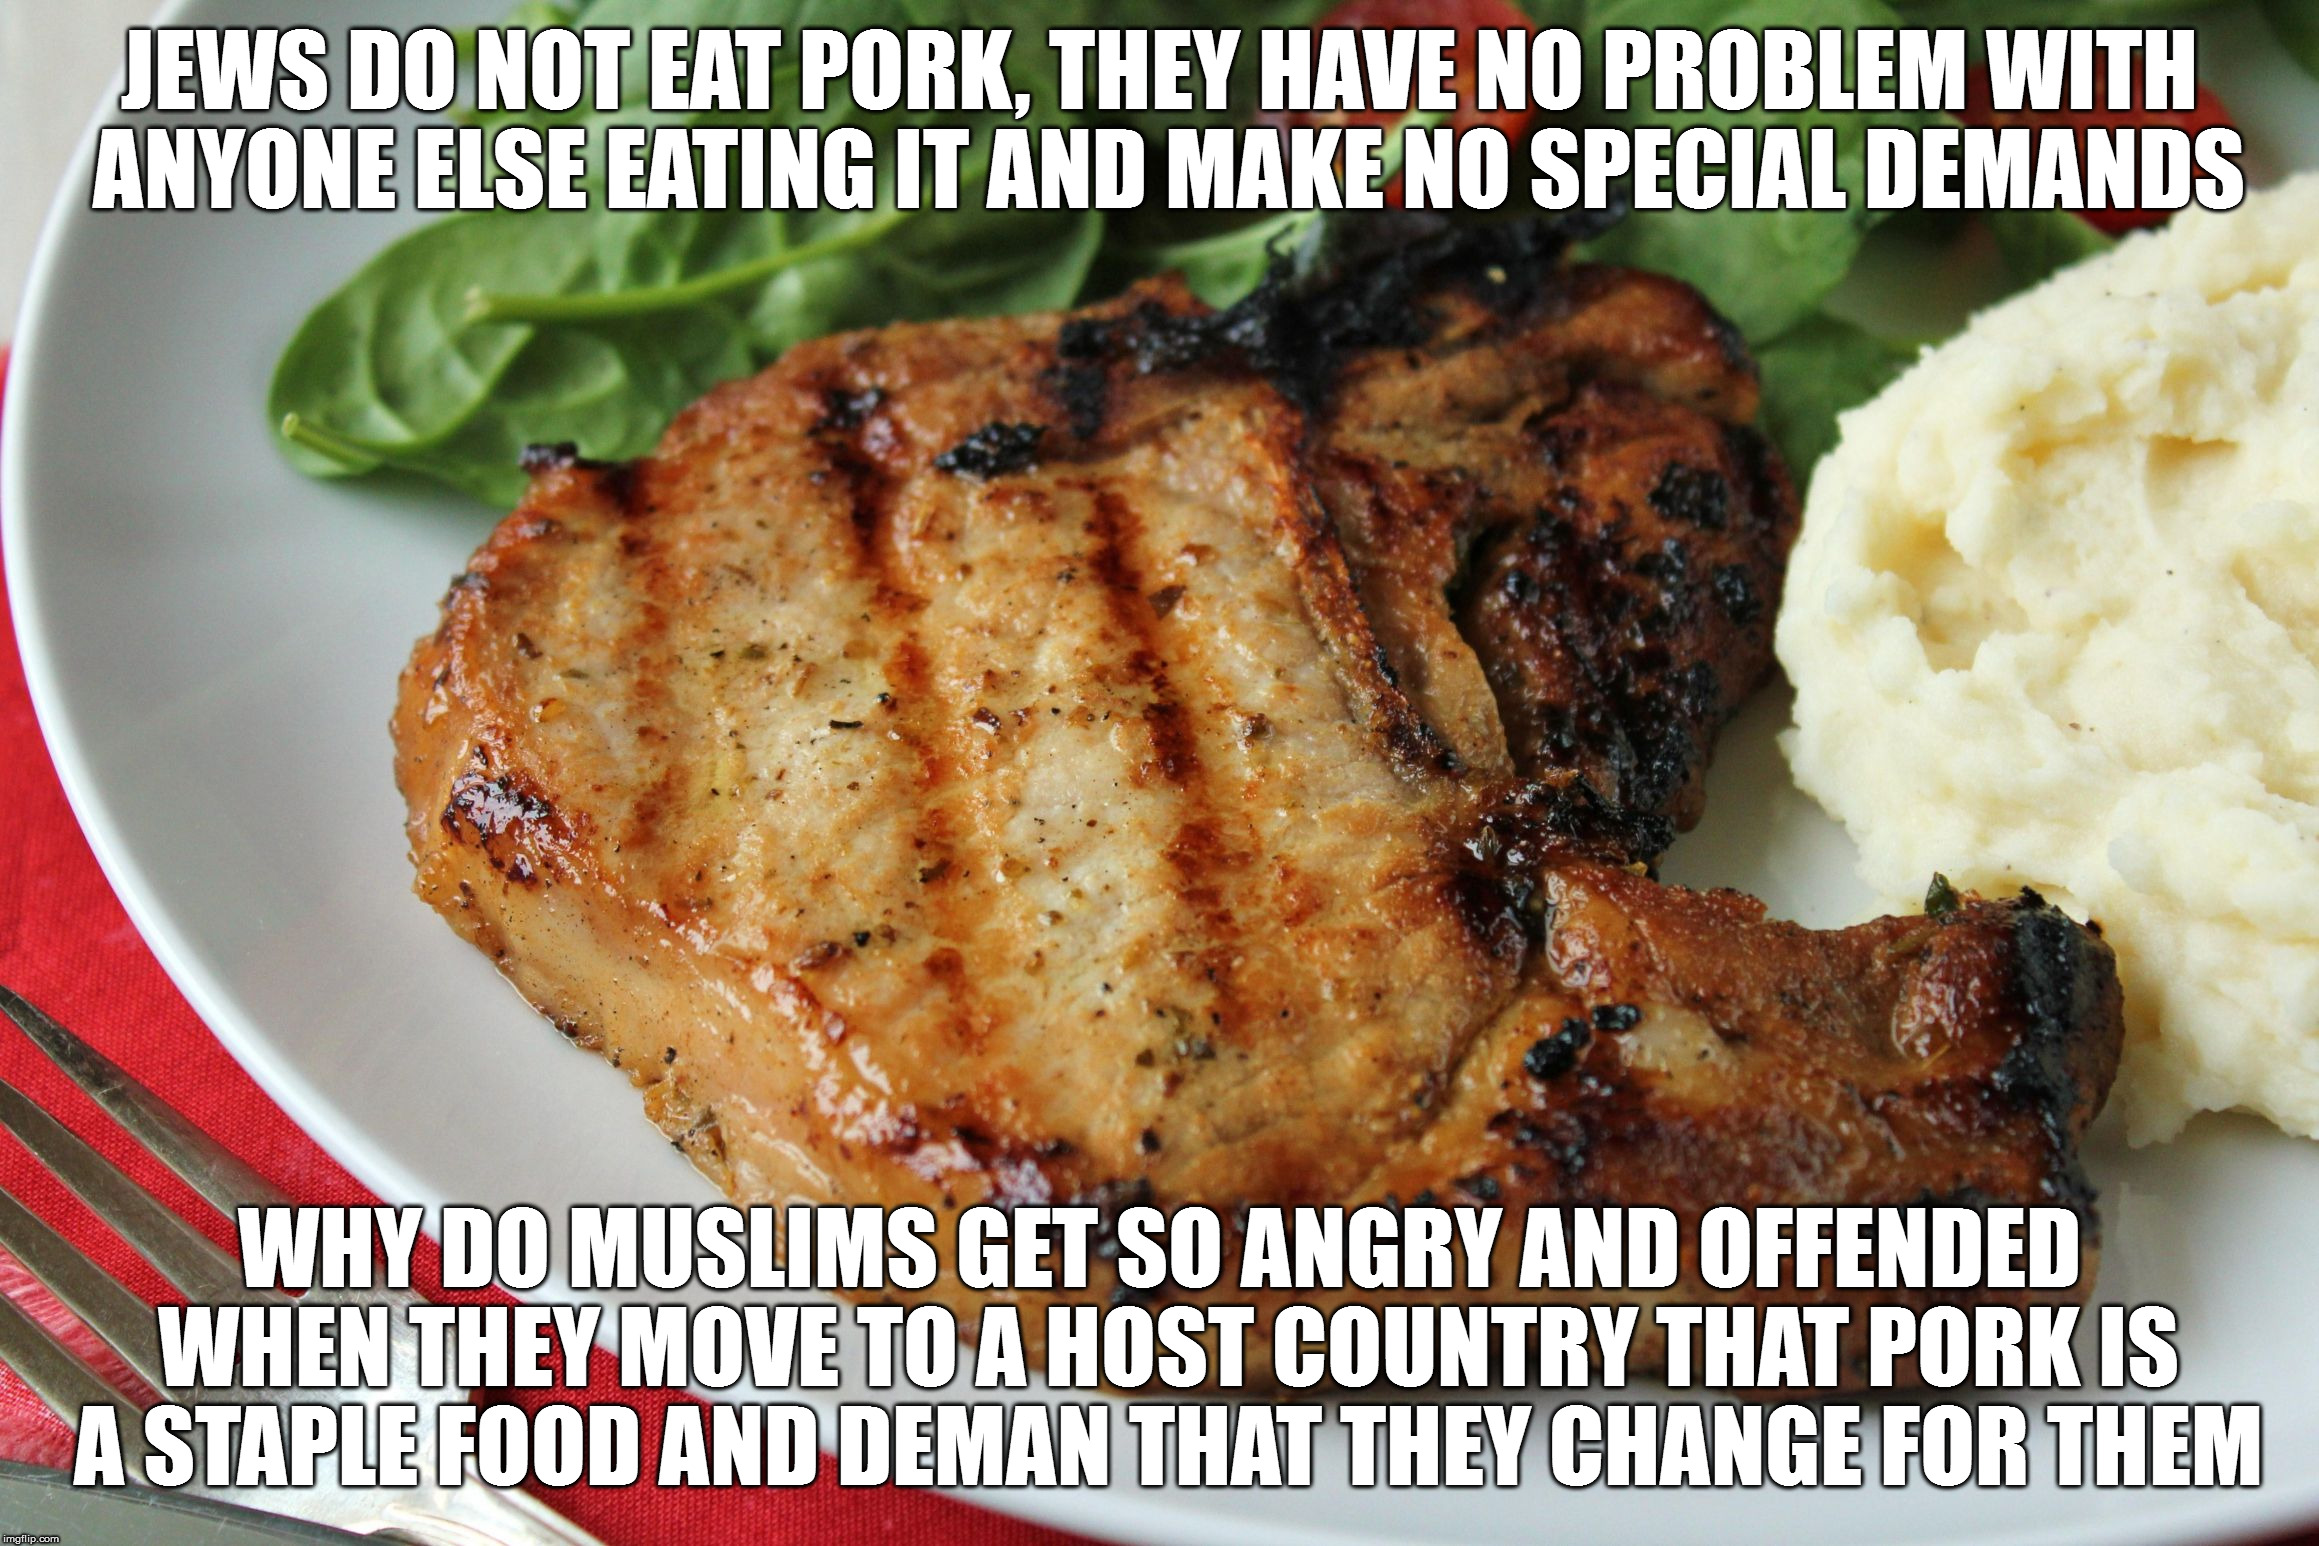 Pork Chop | JEWS DO NOT EAT PORK, THEY HAVE NO PROBLEM WITH ANYONE ELSE EATING IT AND MAKE NO SPECIAL DEMANDS; WHY DO MUSLIMS GET SO ANGRY AND OFFENDED WHEN THEY MOVE TO A HOST COUNTRY THAT PORK IS A STAPLE FOOD AND DEMAN THAT THEY CHANGE FOR THEM | image tagged in pork chop | made w/ Imgflip meme maker